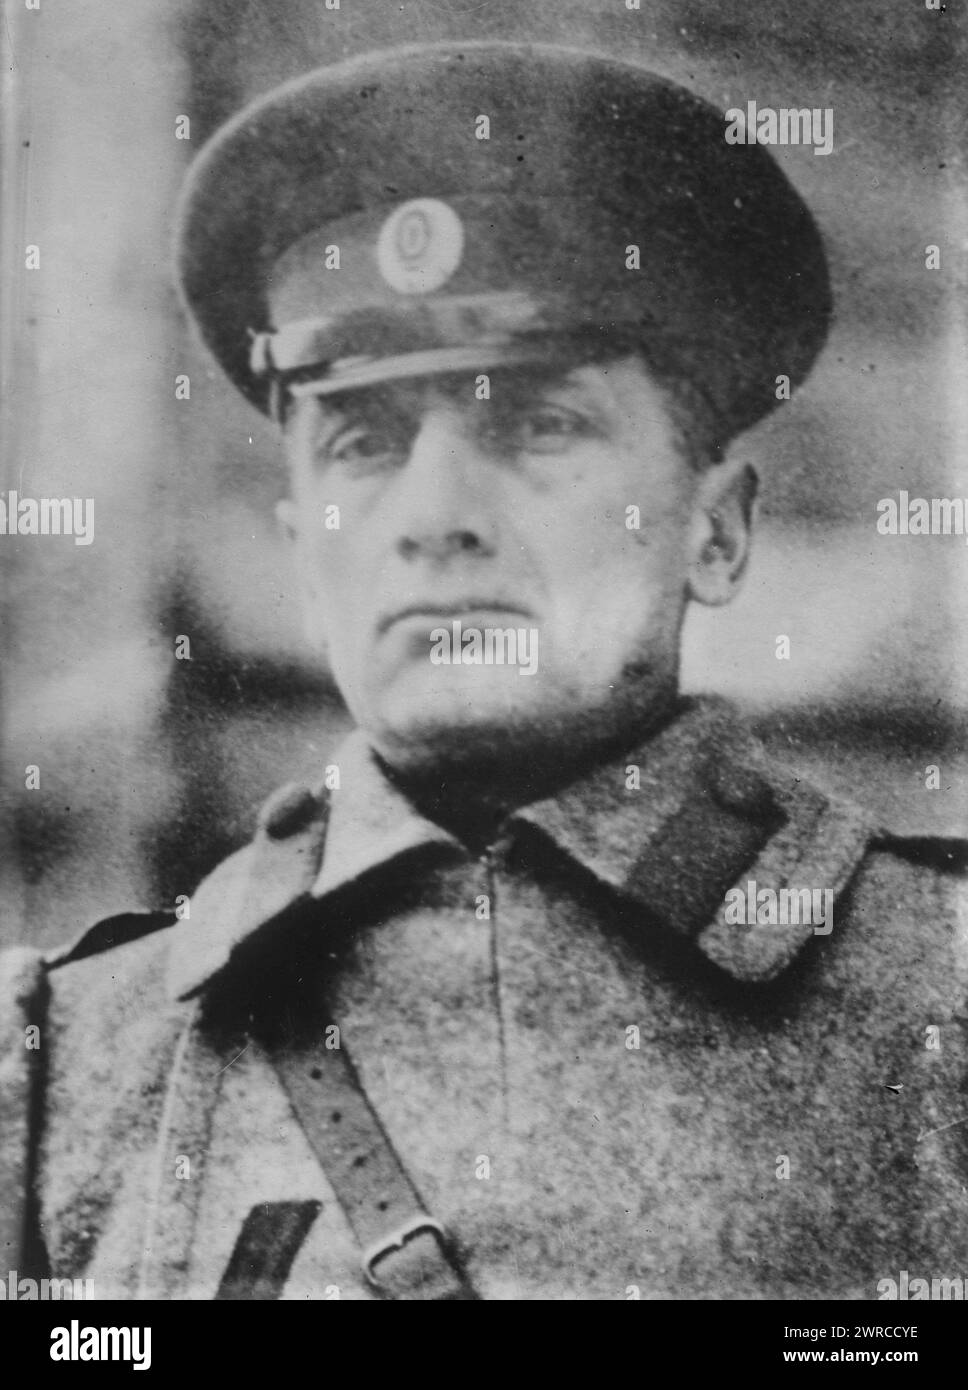 Adm. Kolchak, Photograph shows Admiral Alexander Vasilyevich Kolchak (1874-1920) who was a polar explorer, commander in the Imperial Russian Navy and Supreme Ruler of Russia., 1919 April 23, Glass negatives, 1 negative: glass Stock Photo